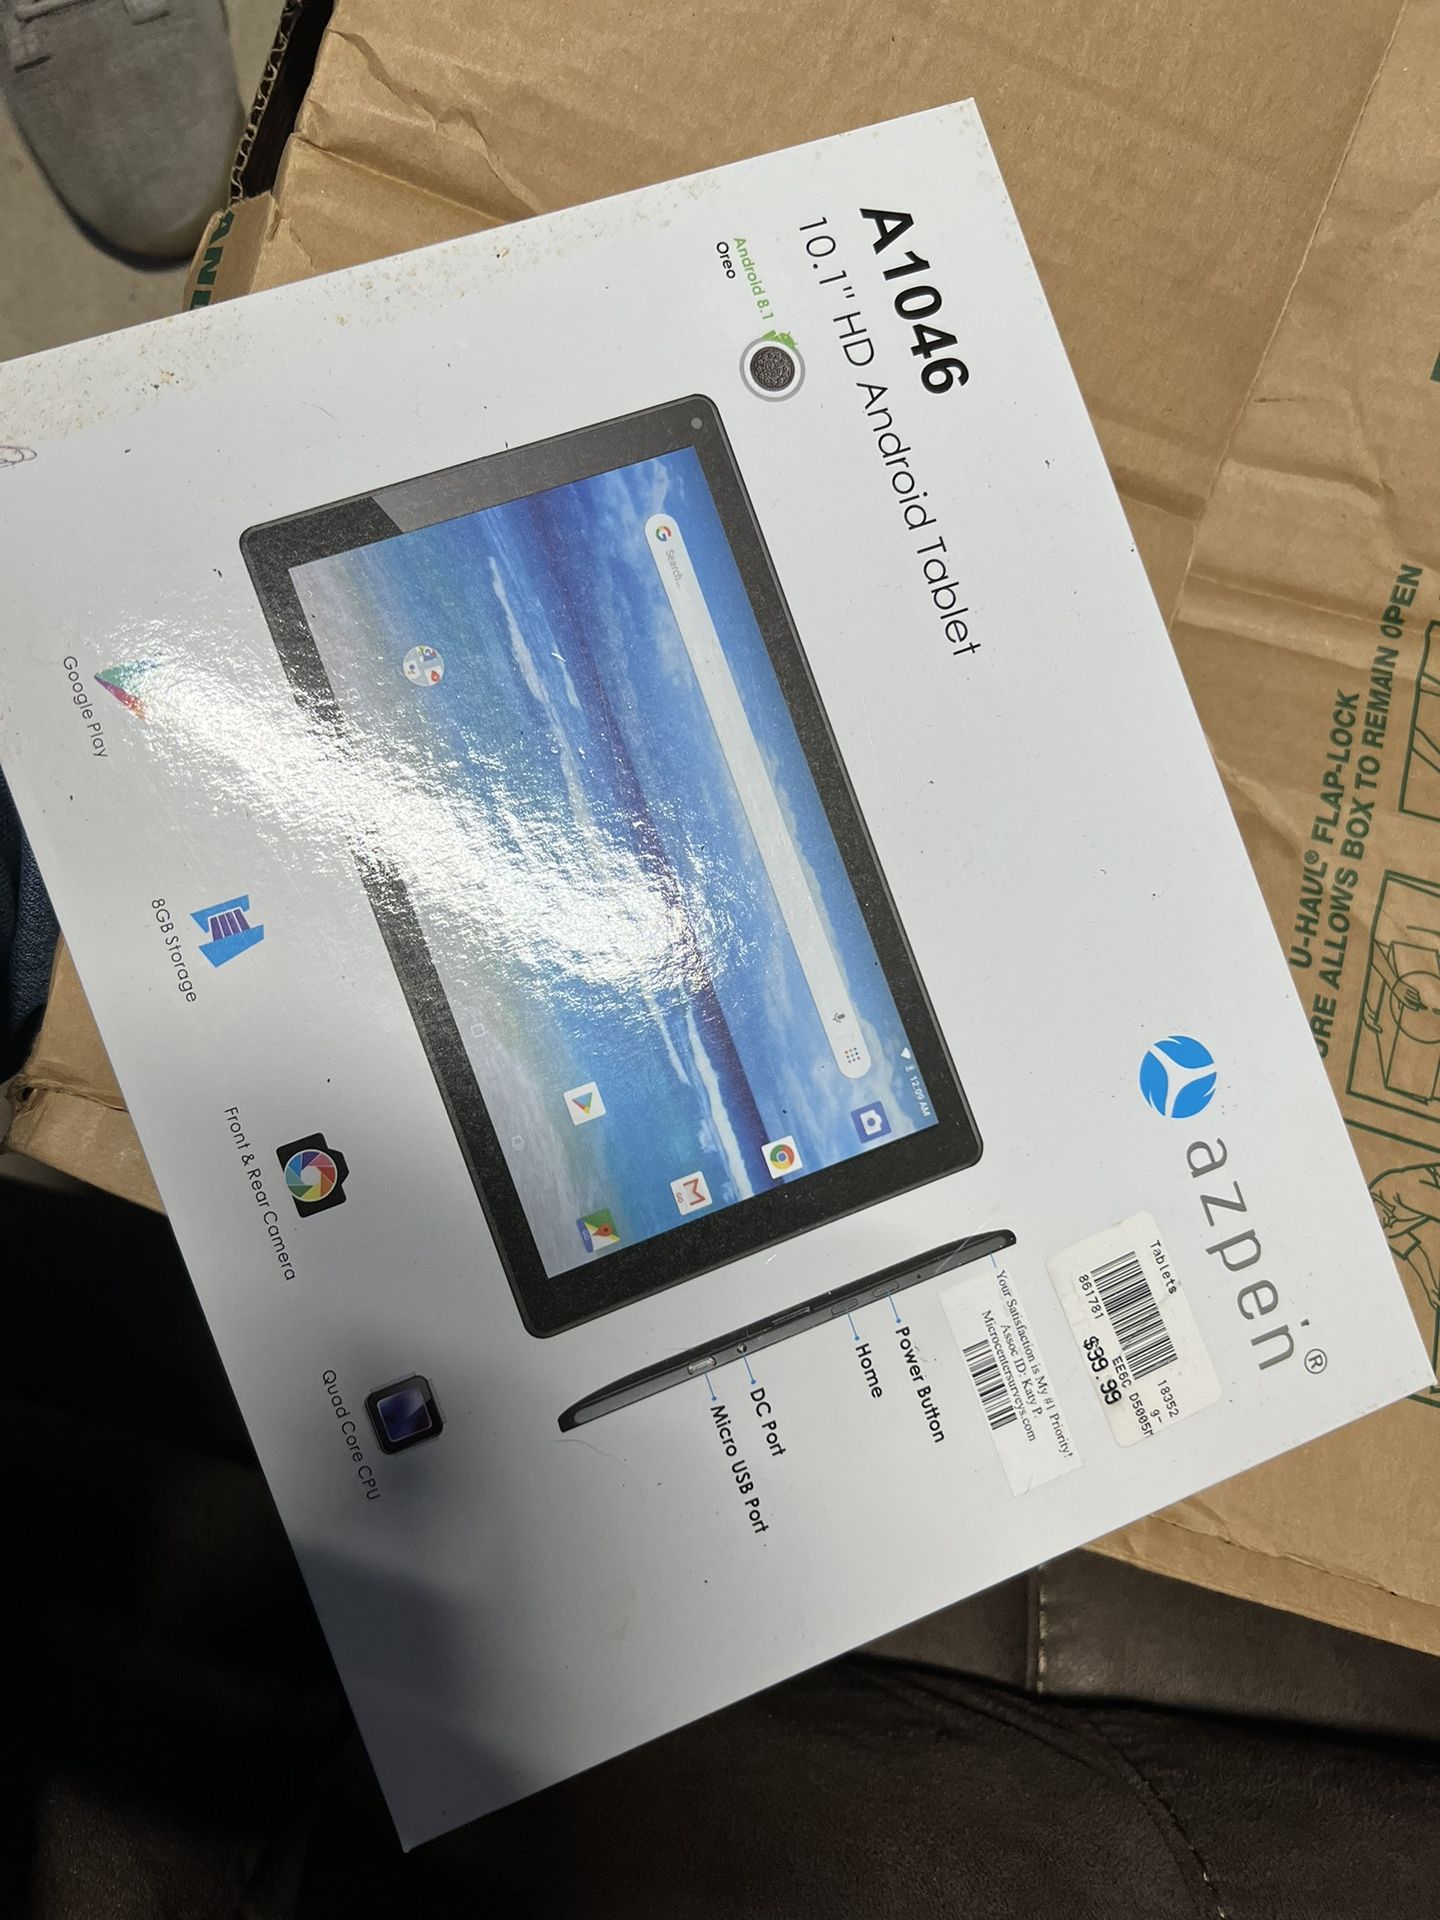 10.1” HD Android Tablet